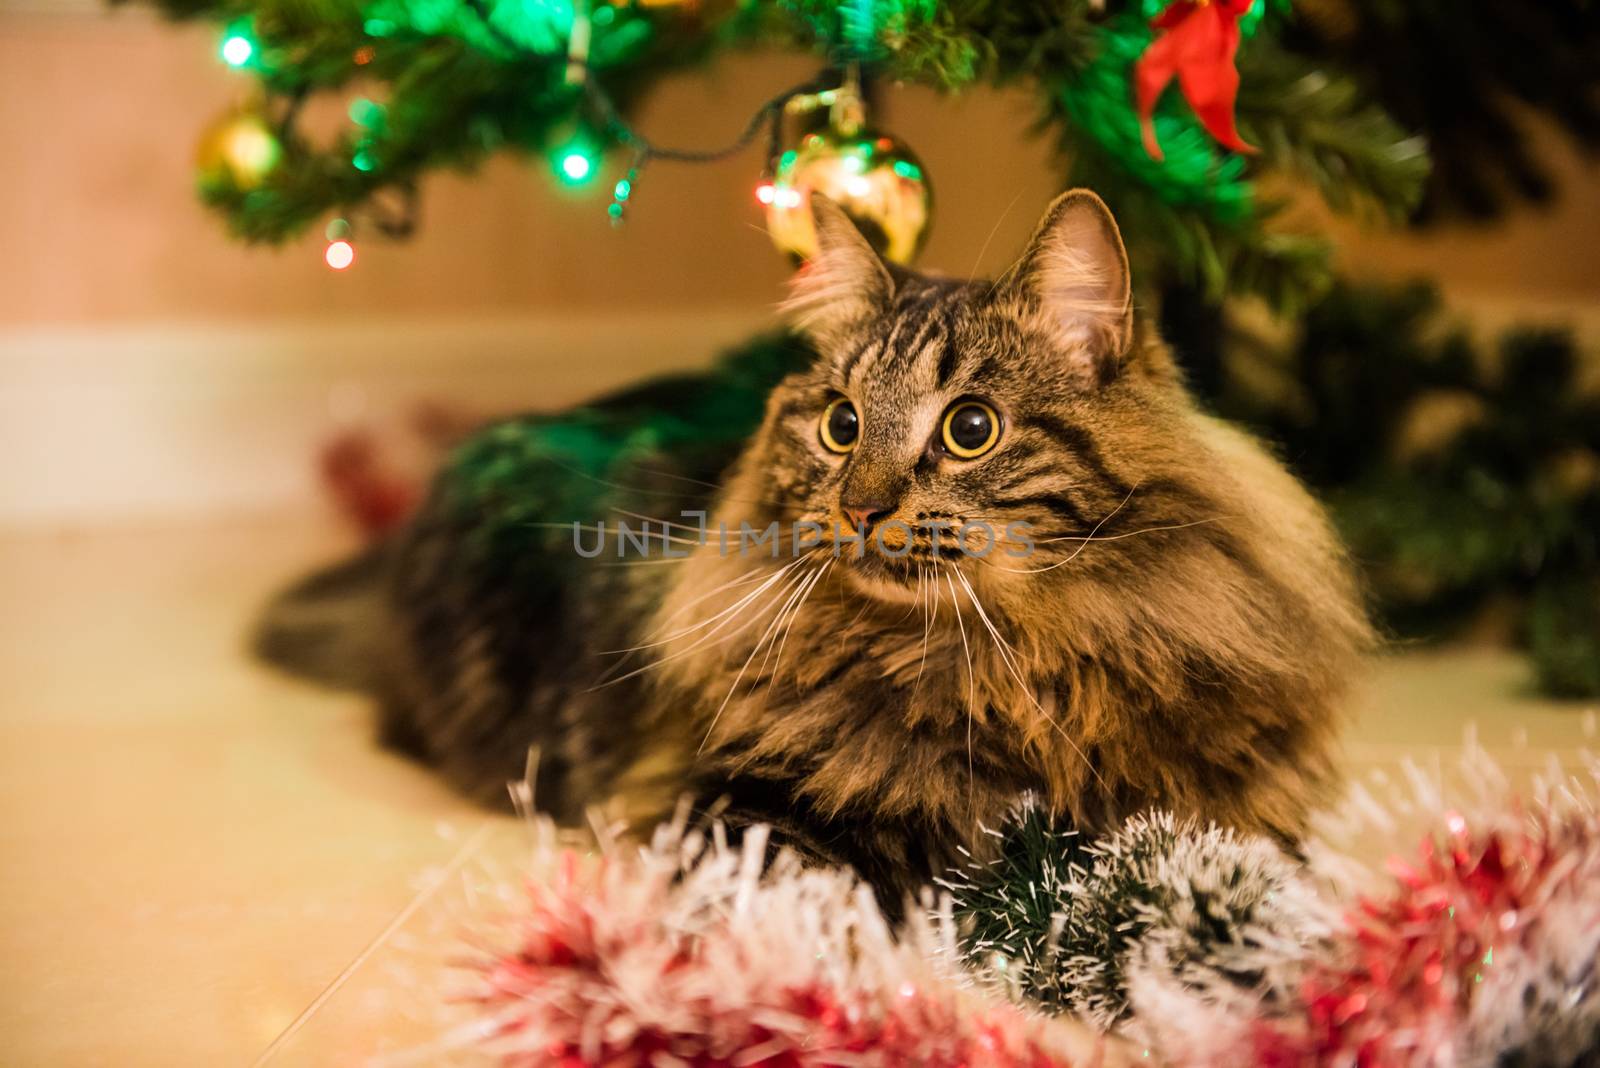 Funny Norwegian cat under Christmas tree plays with Christmas tree toys